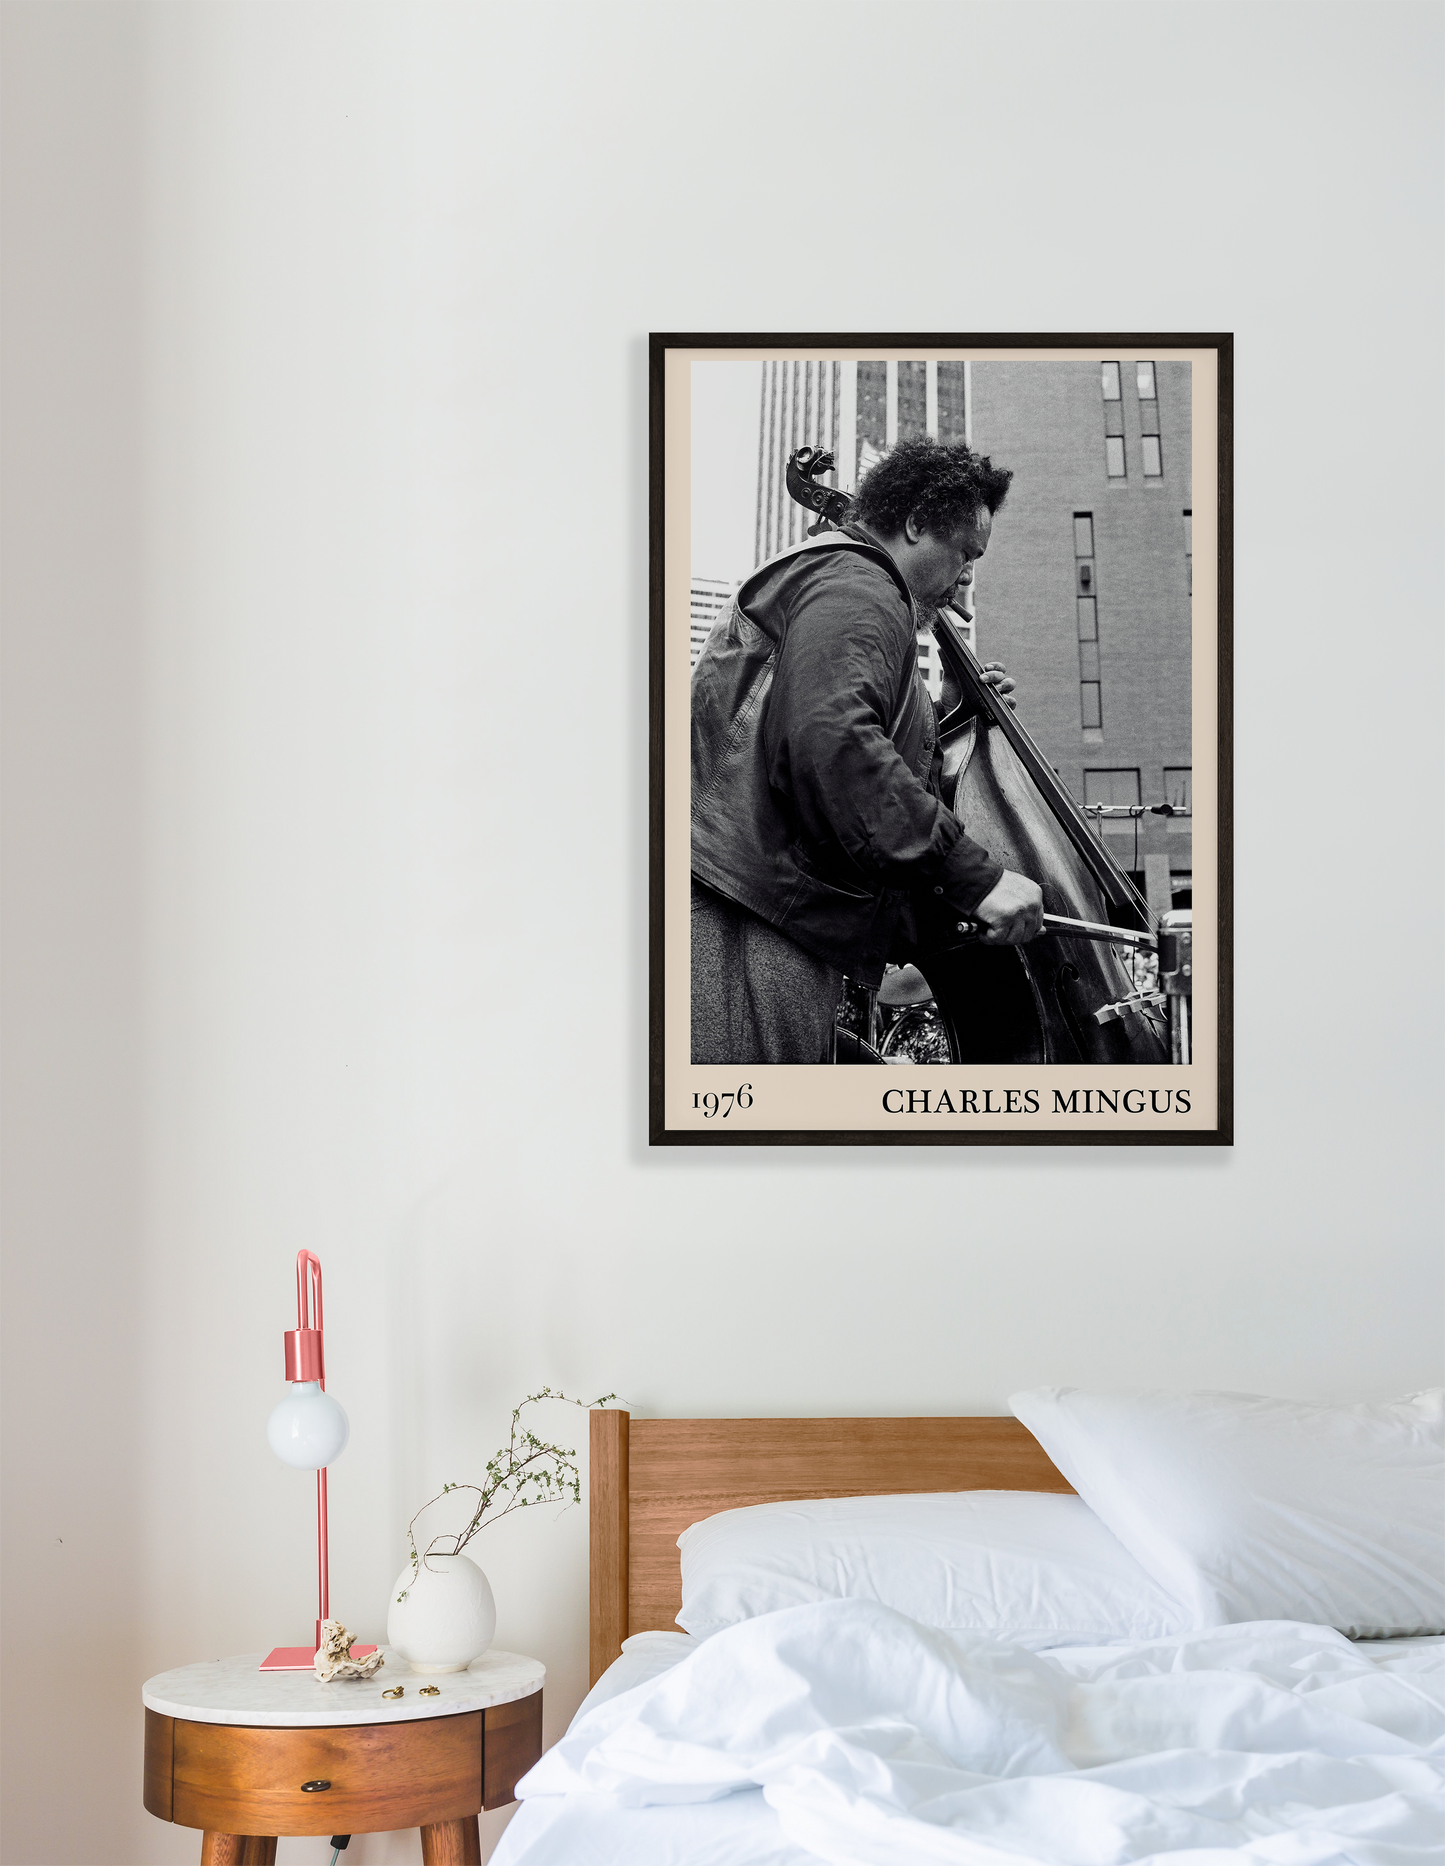 1976 photograph of Charles Mingus taken by Thomas Marcello. Picture crafted into a cool black framed music print, with an off-white border. Poster is hanging on a white bedroom wall.